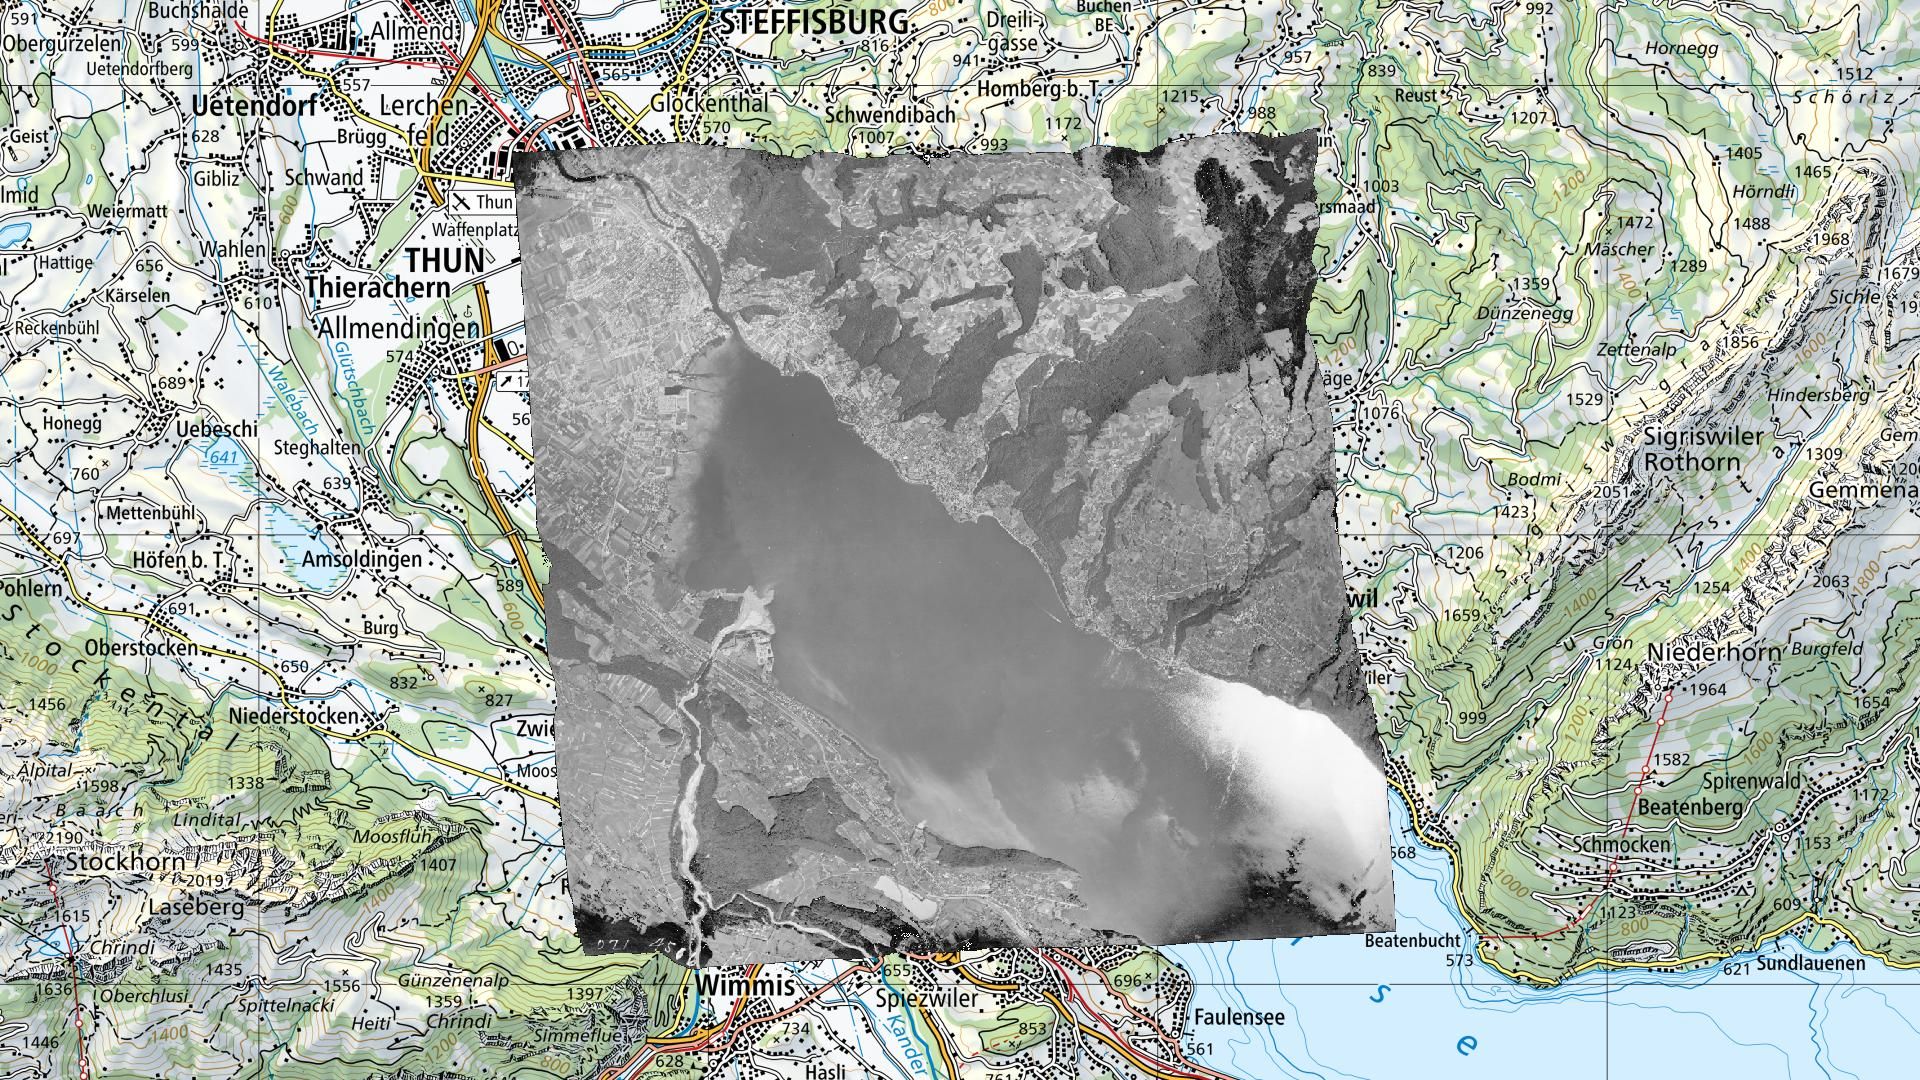 Orthophoto of swisstopo's black and white aerial image overlaid on the national map in a GIS application.